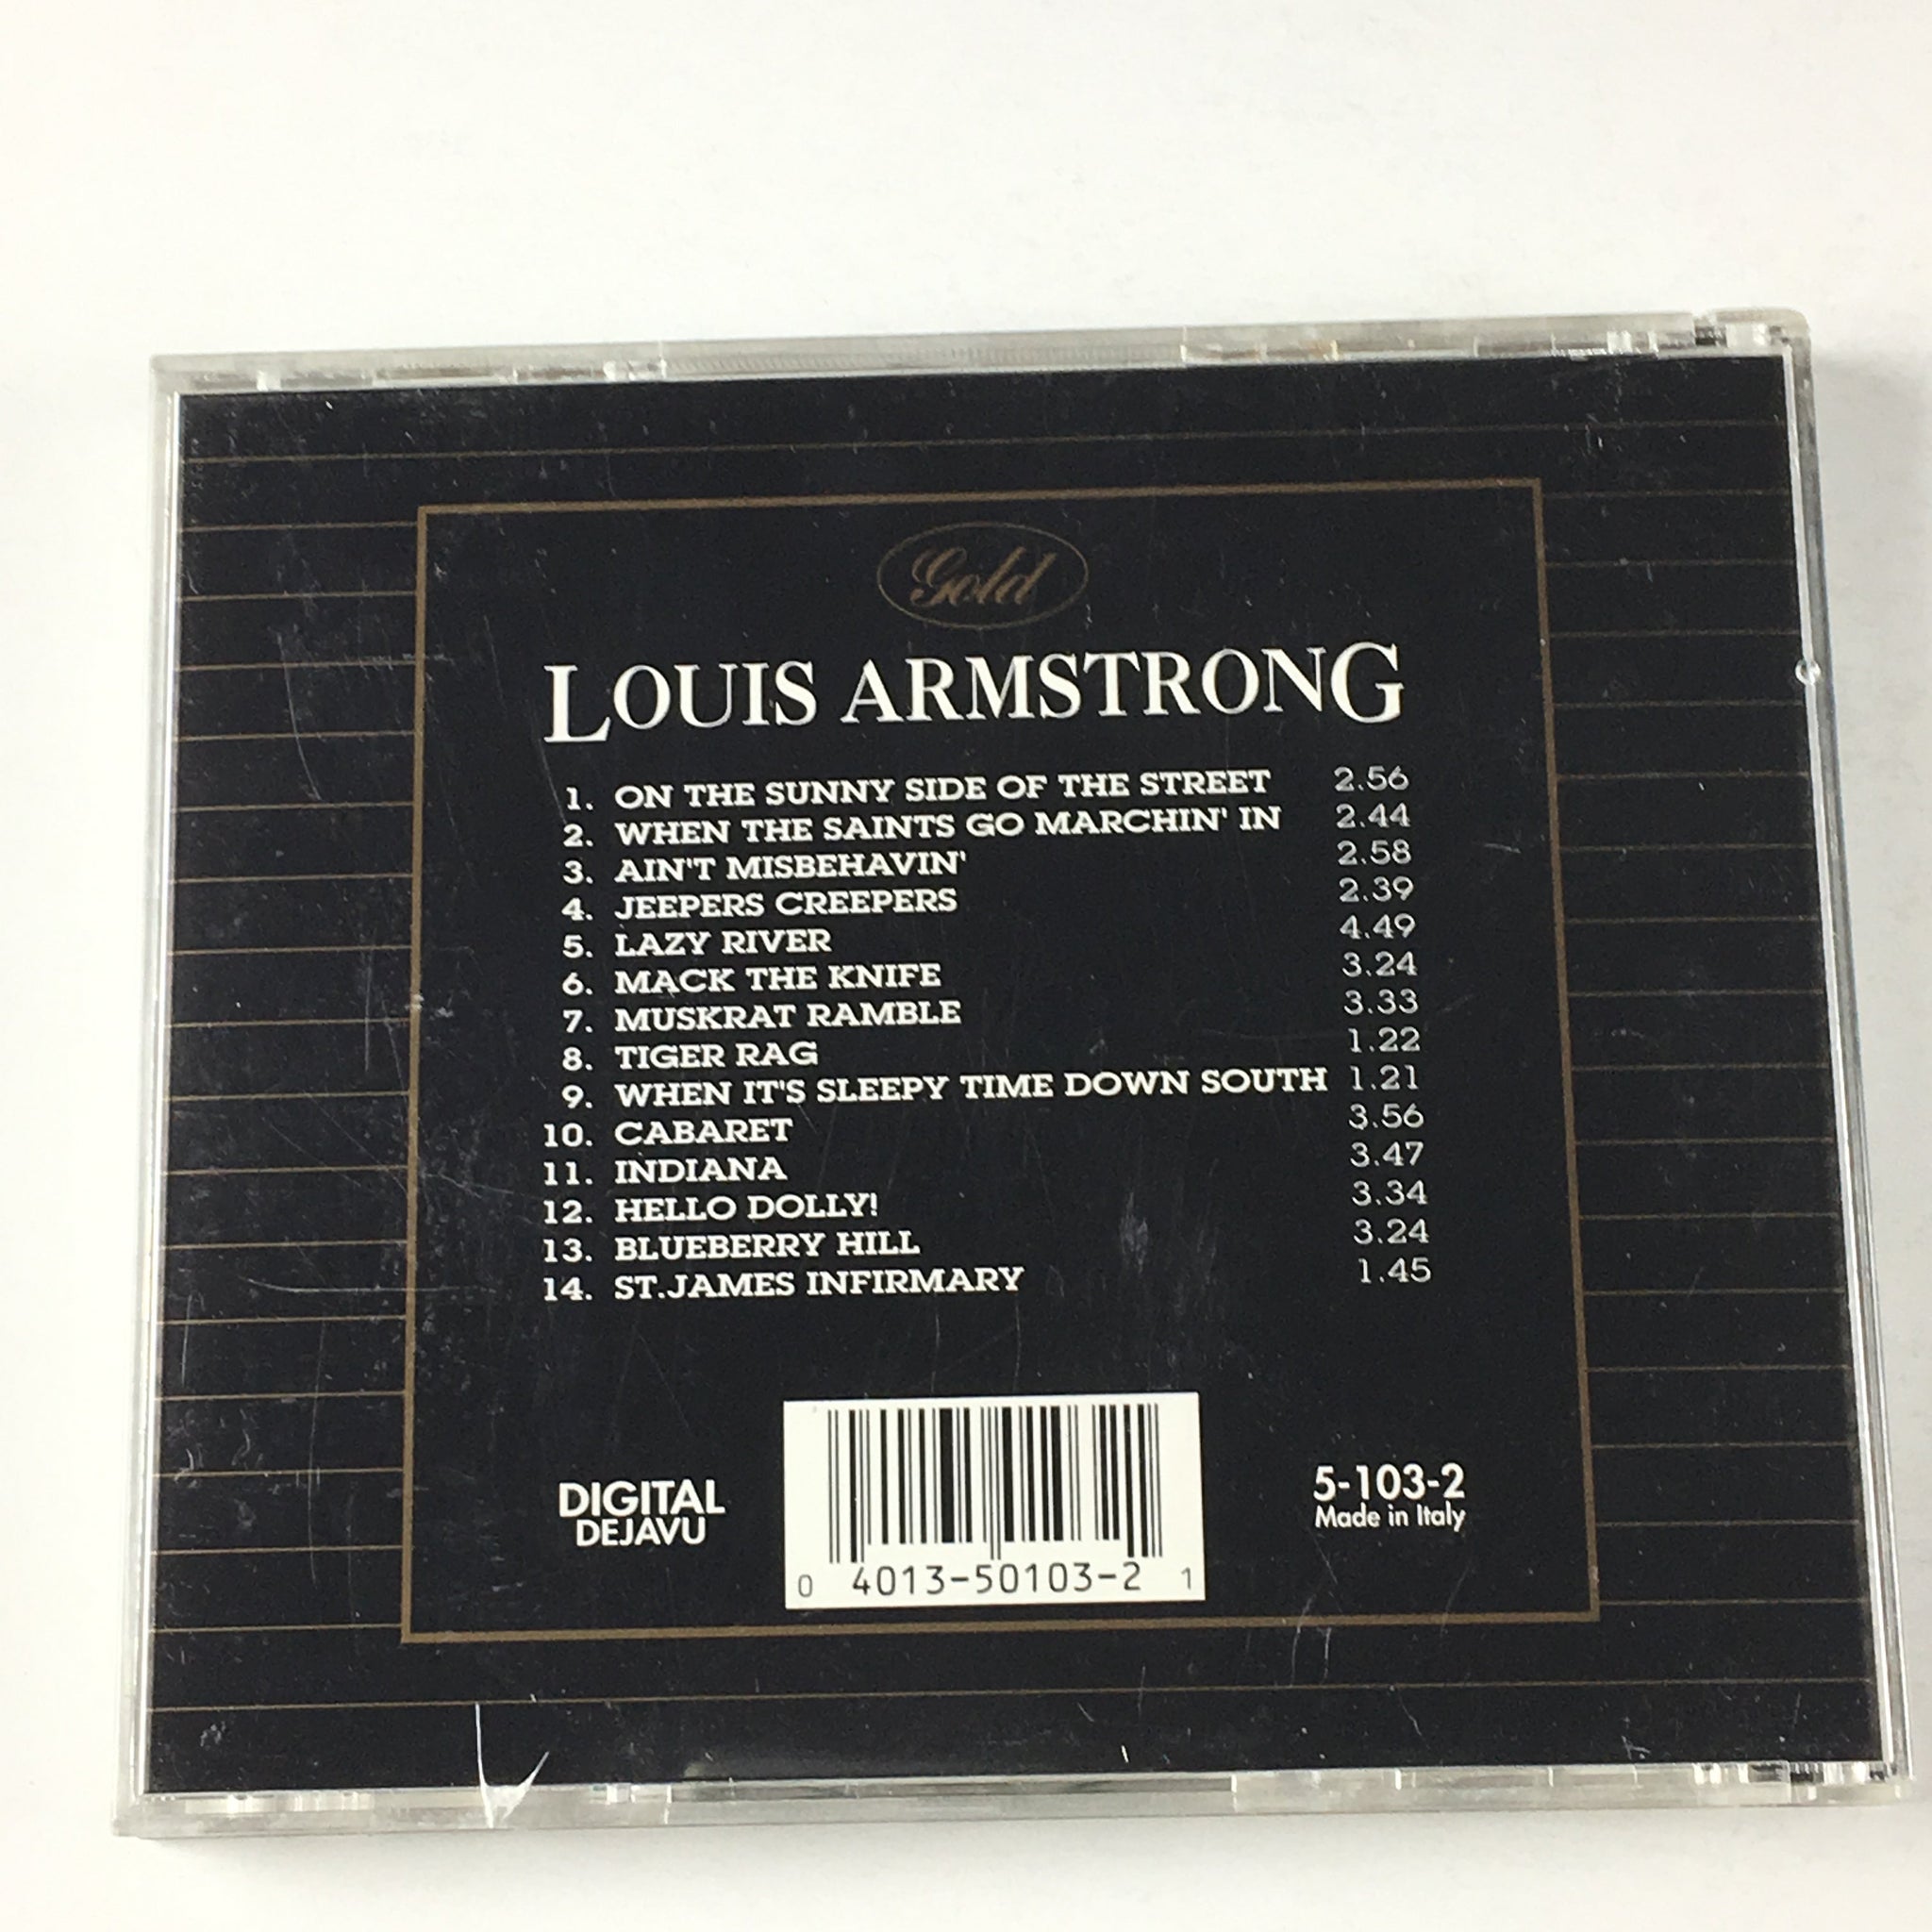 Louis Armstrong What A Wonderful World Used CD VG\VG - Slow Turnin Vinyl